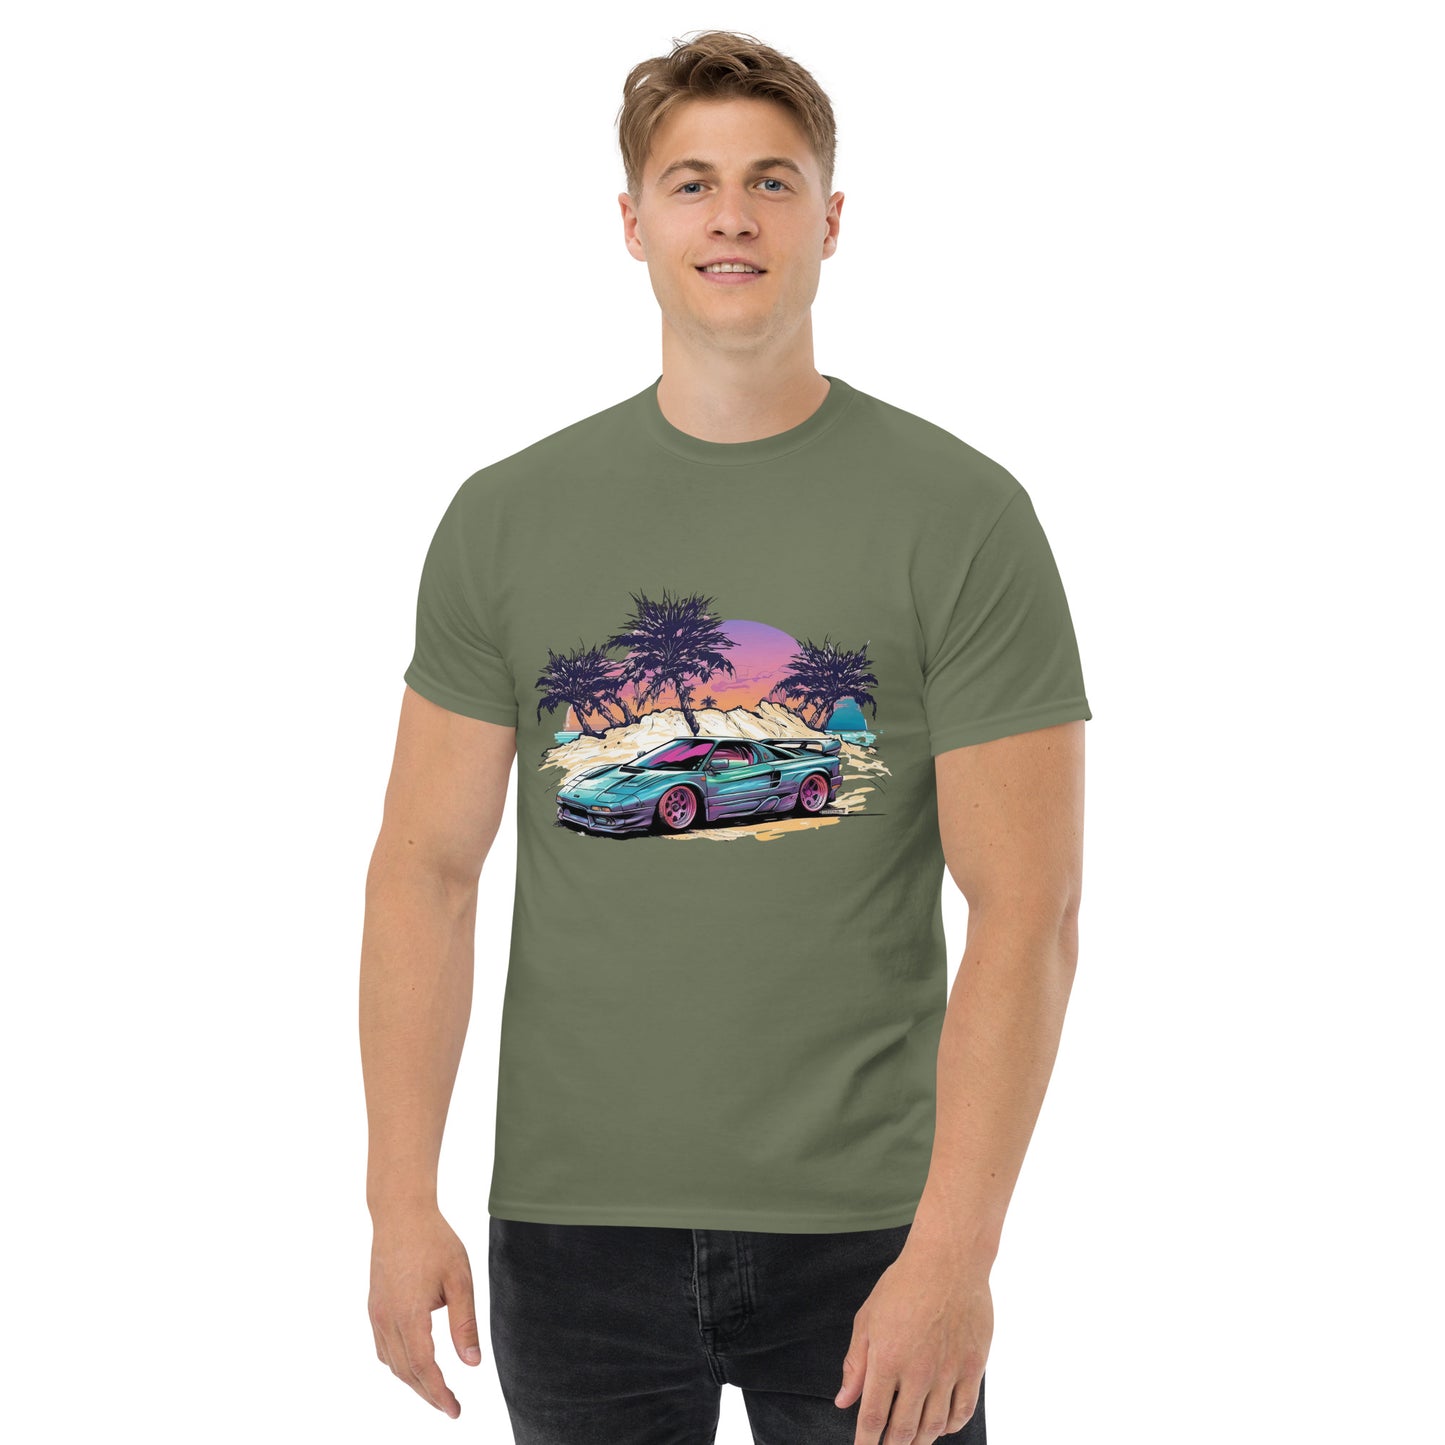 man with military green t-shirt with picture of vintage car in front of palm trees 